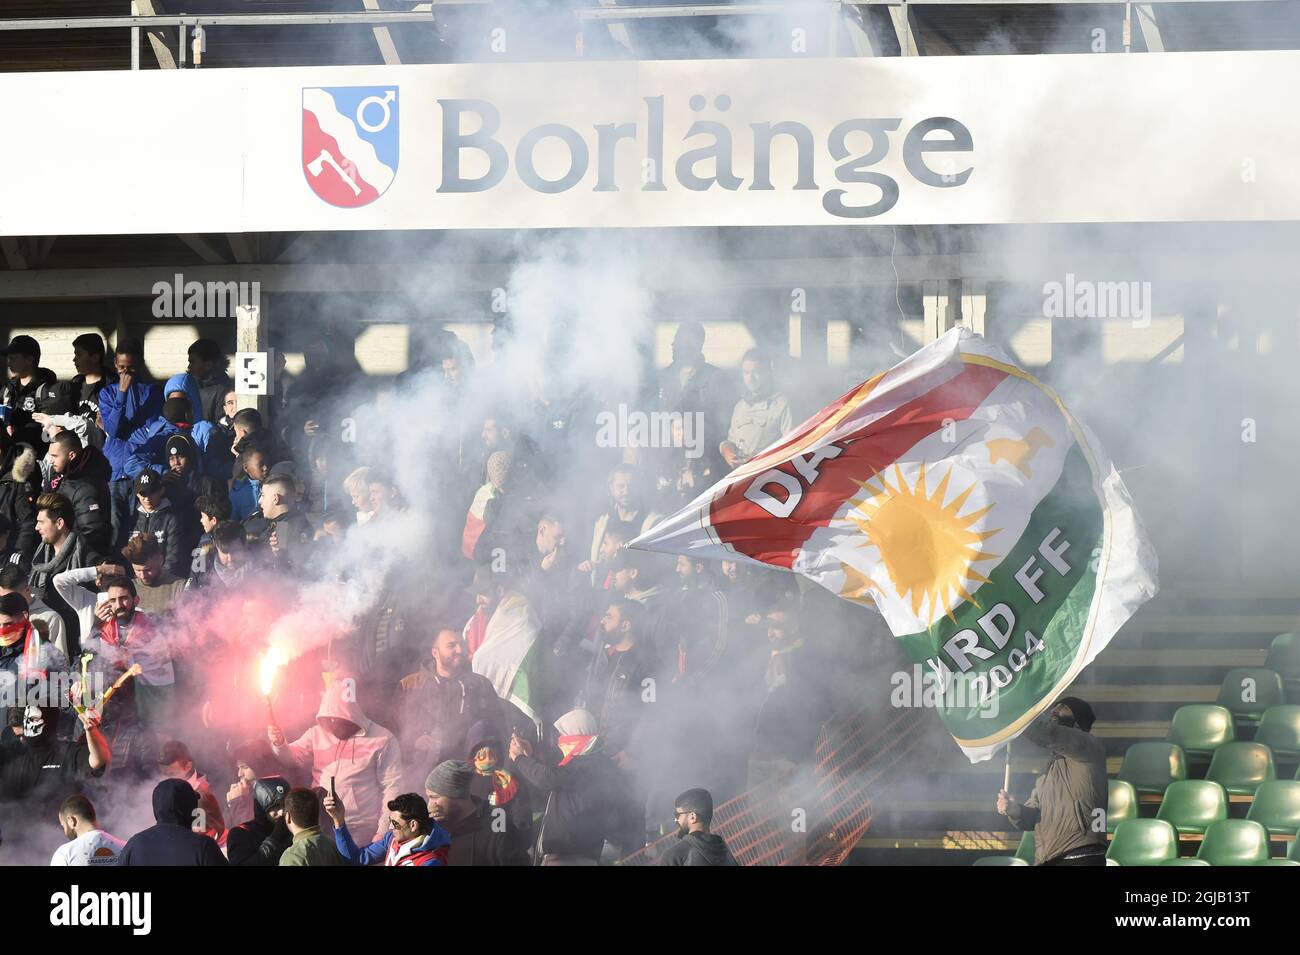 FILE 2017-10-28 Dalkurd supporters as their team play to win against Gais in a Superettan (Swedish second soccer leauge) soccer match at Domnarvsvallen in Borlange on Oct. 28, 2017. The win means Dalkurd will play in Allsvenskan, the Swedish first division soccer league 2018. Photo: Ulf Palm / TT / code 9110  Stock Photo